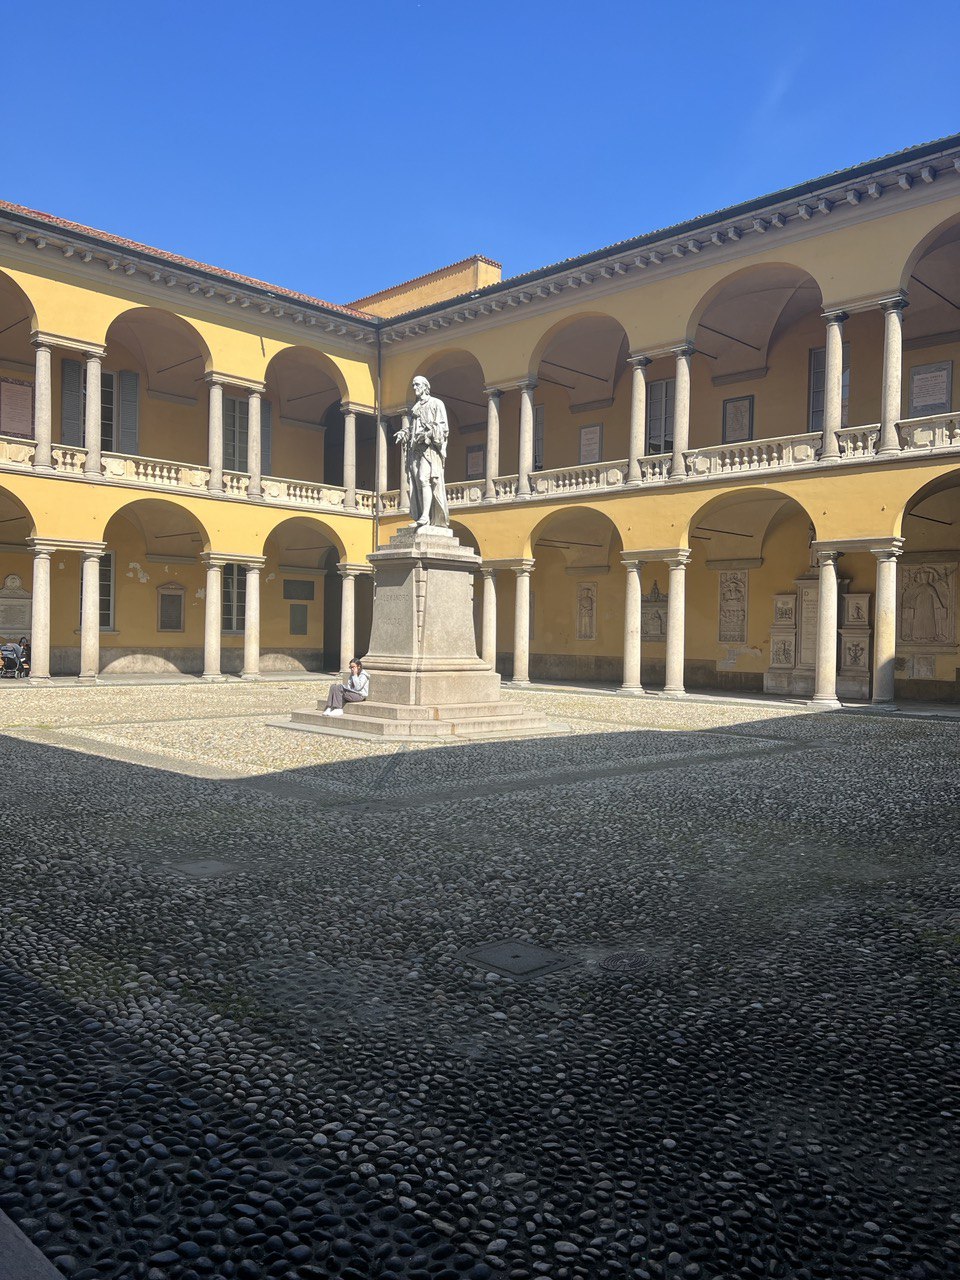 The central University of Pavia